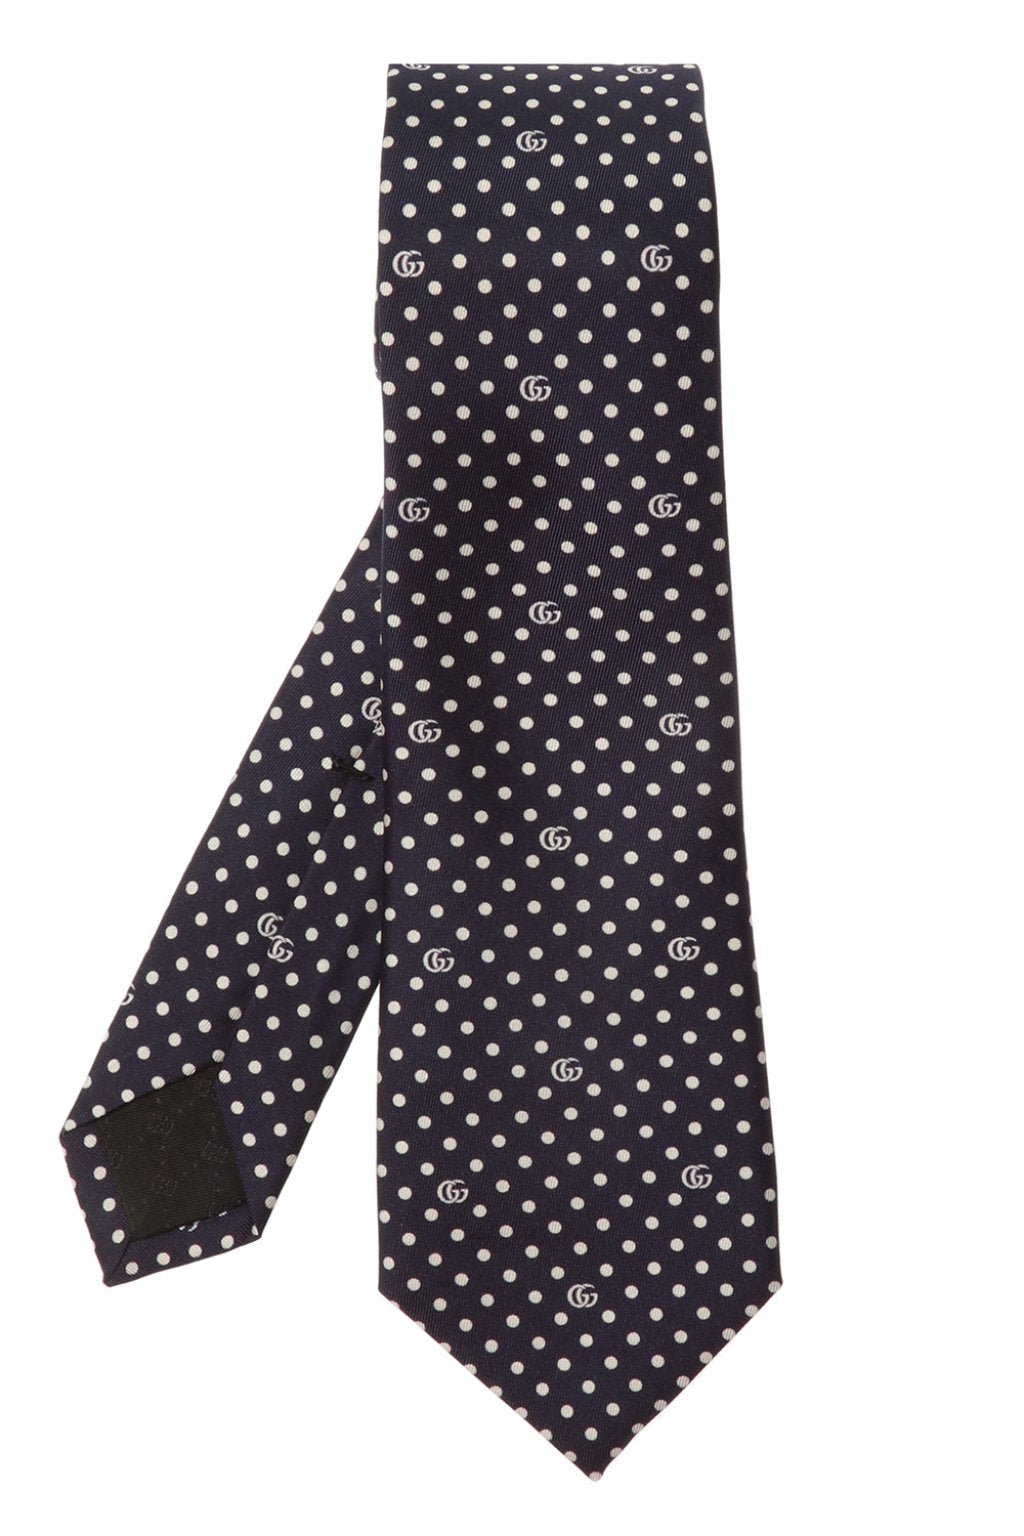 Gucci Navy Silk Tie with White Polka Dots